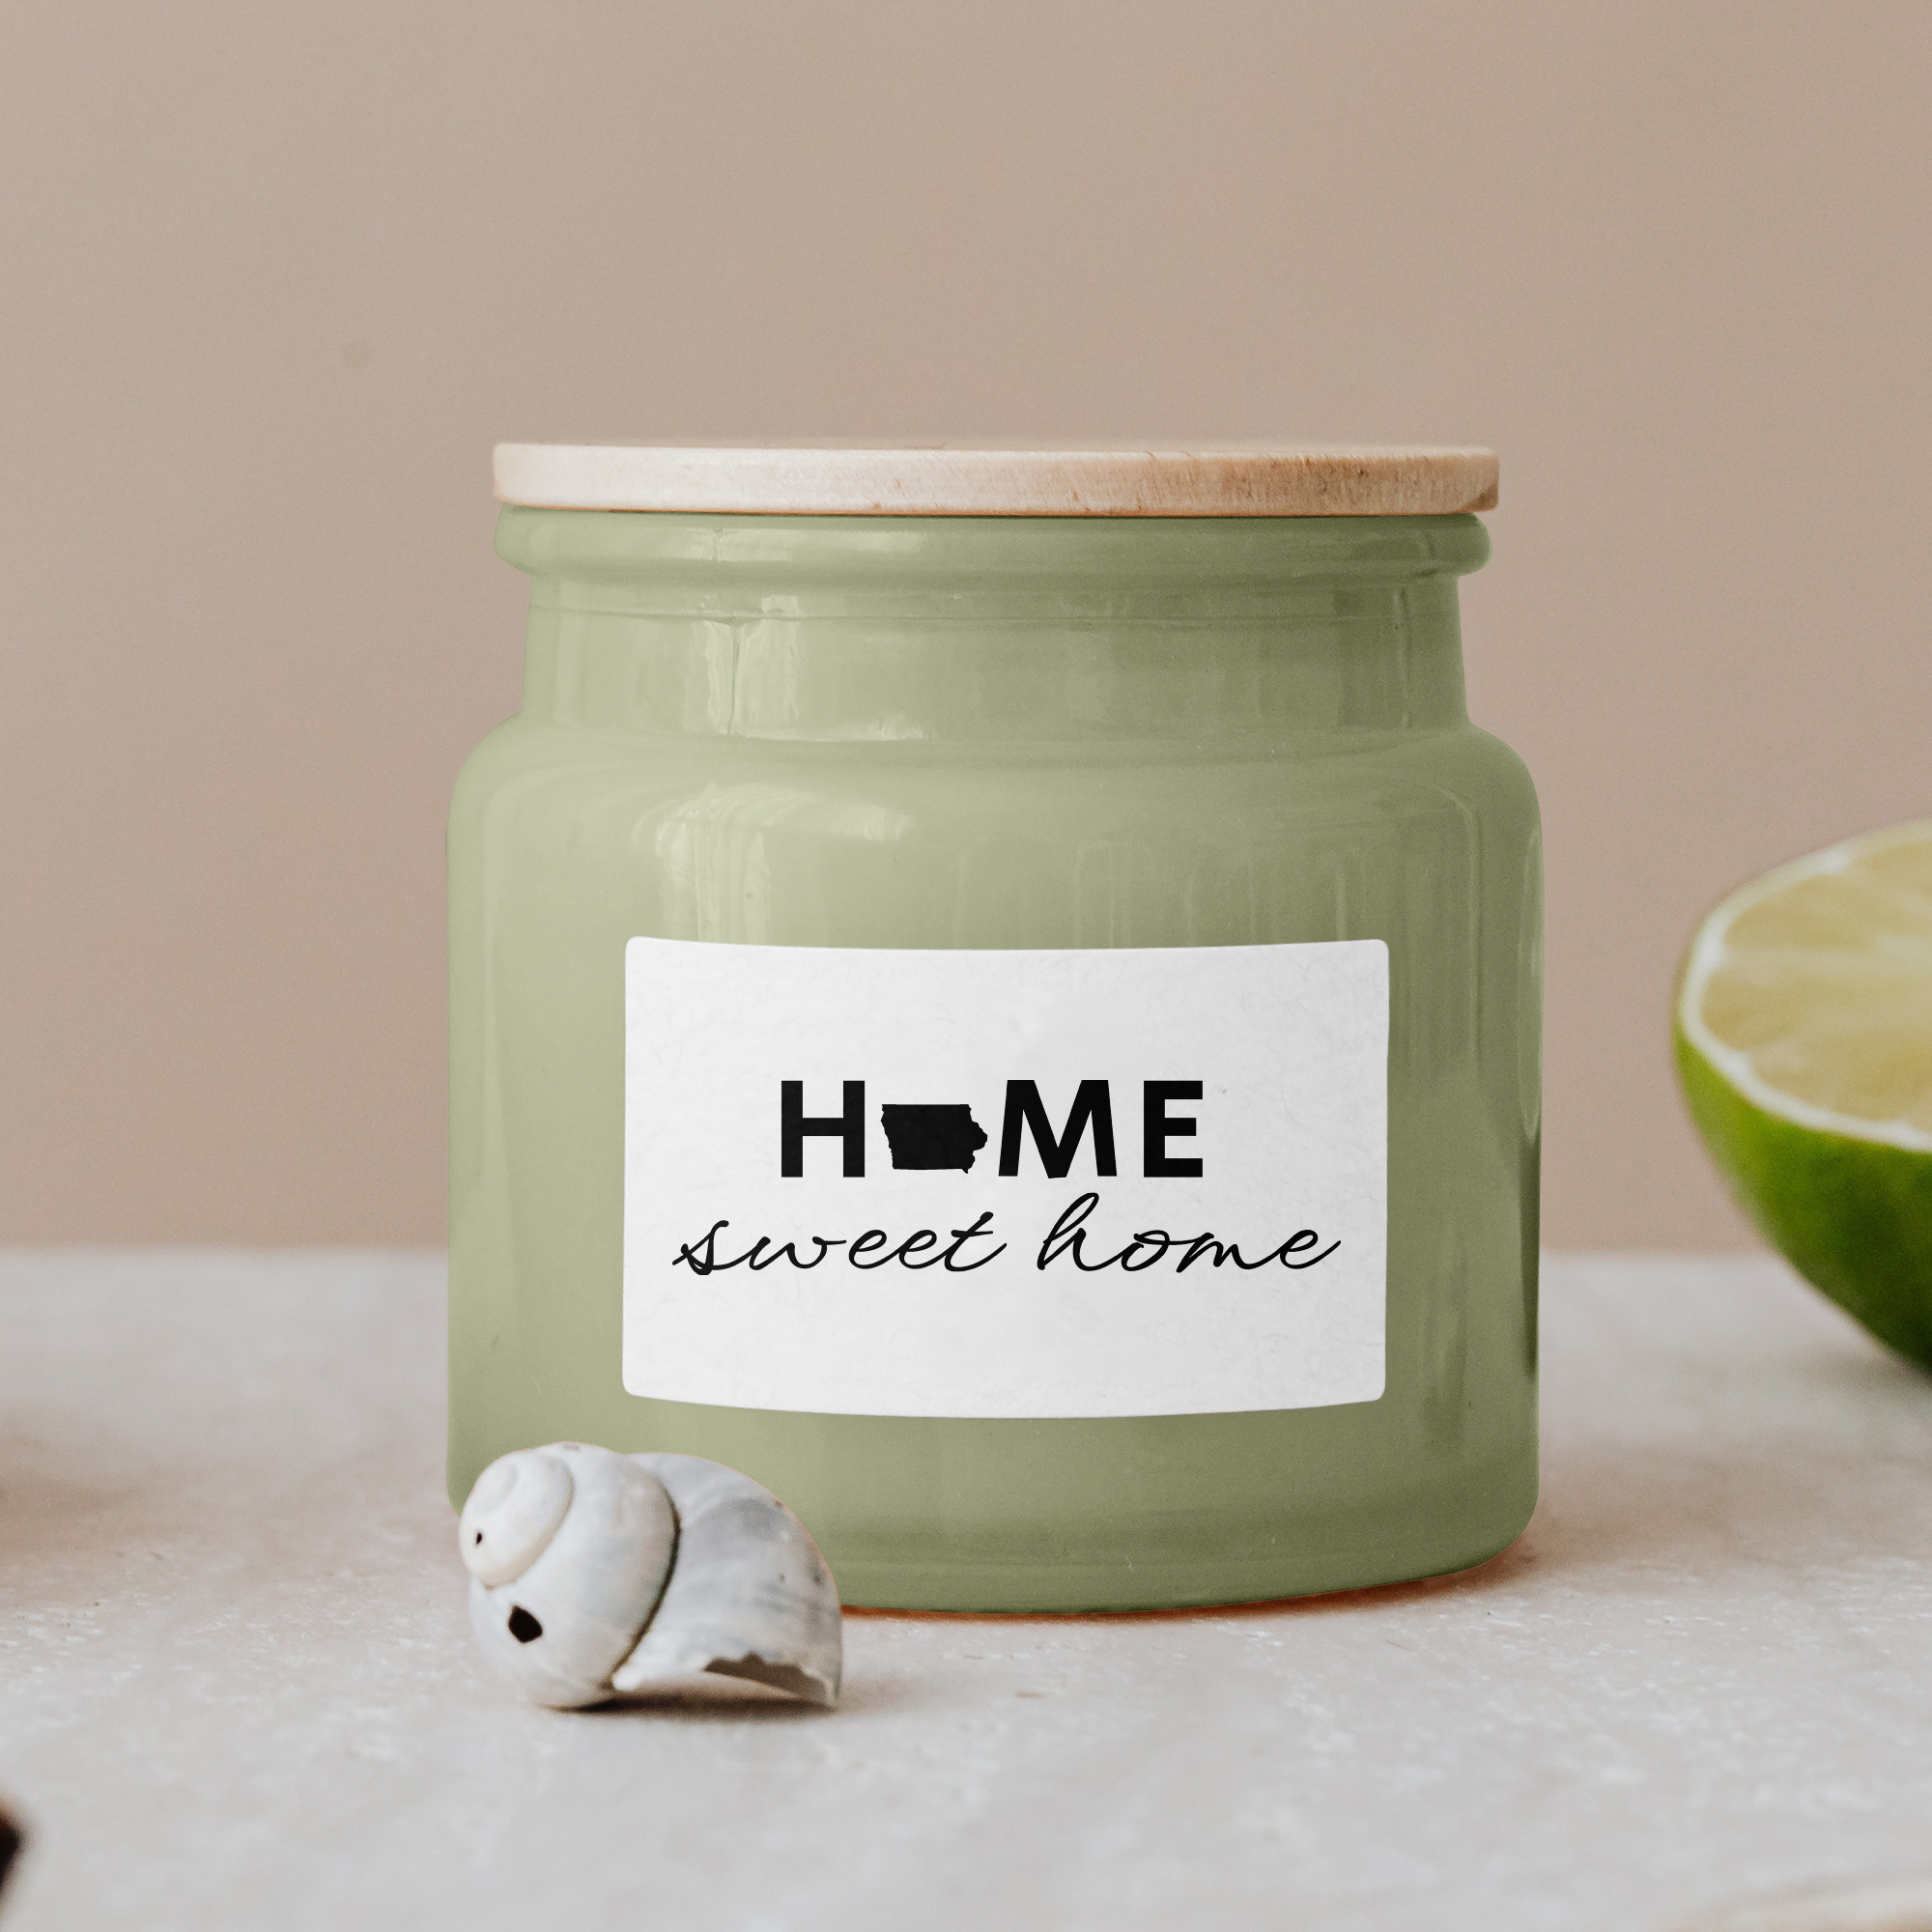 Black lettering "Home sweet home" on a white label on a green glass jar with wooden lid.